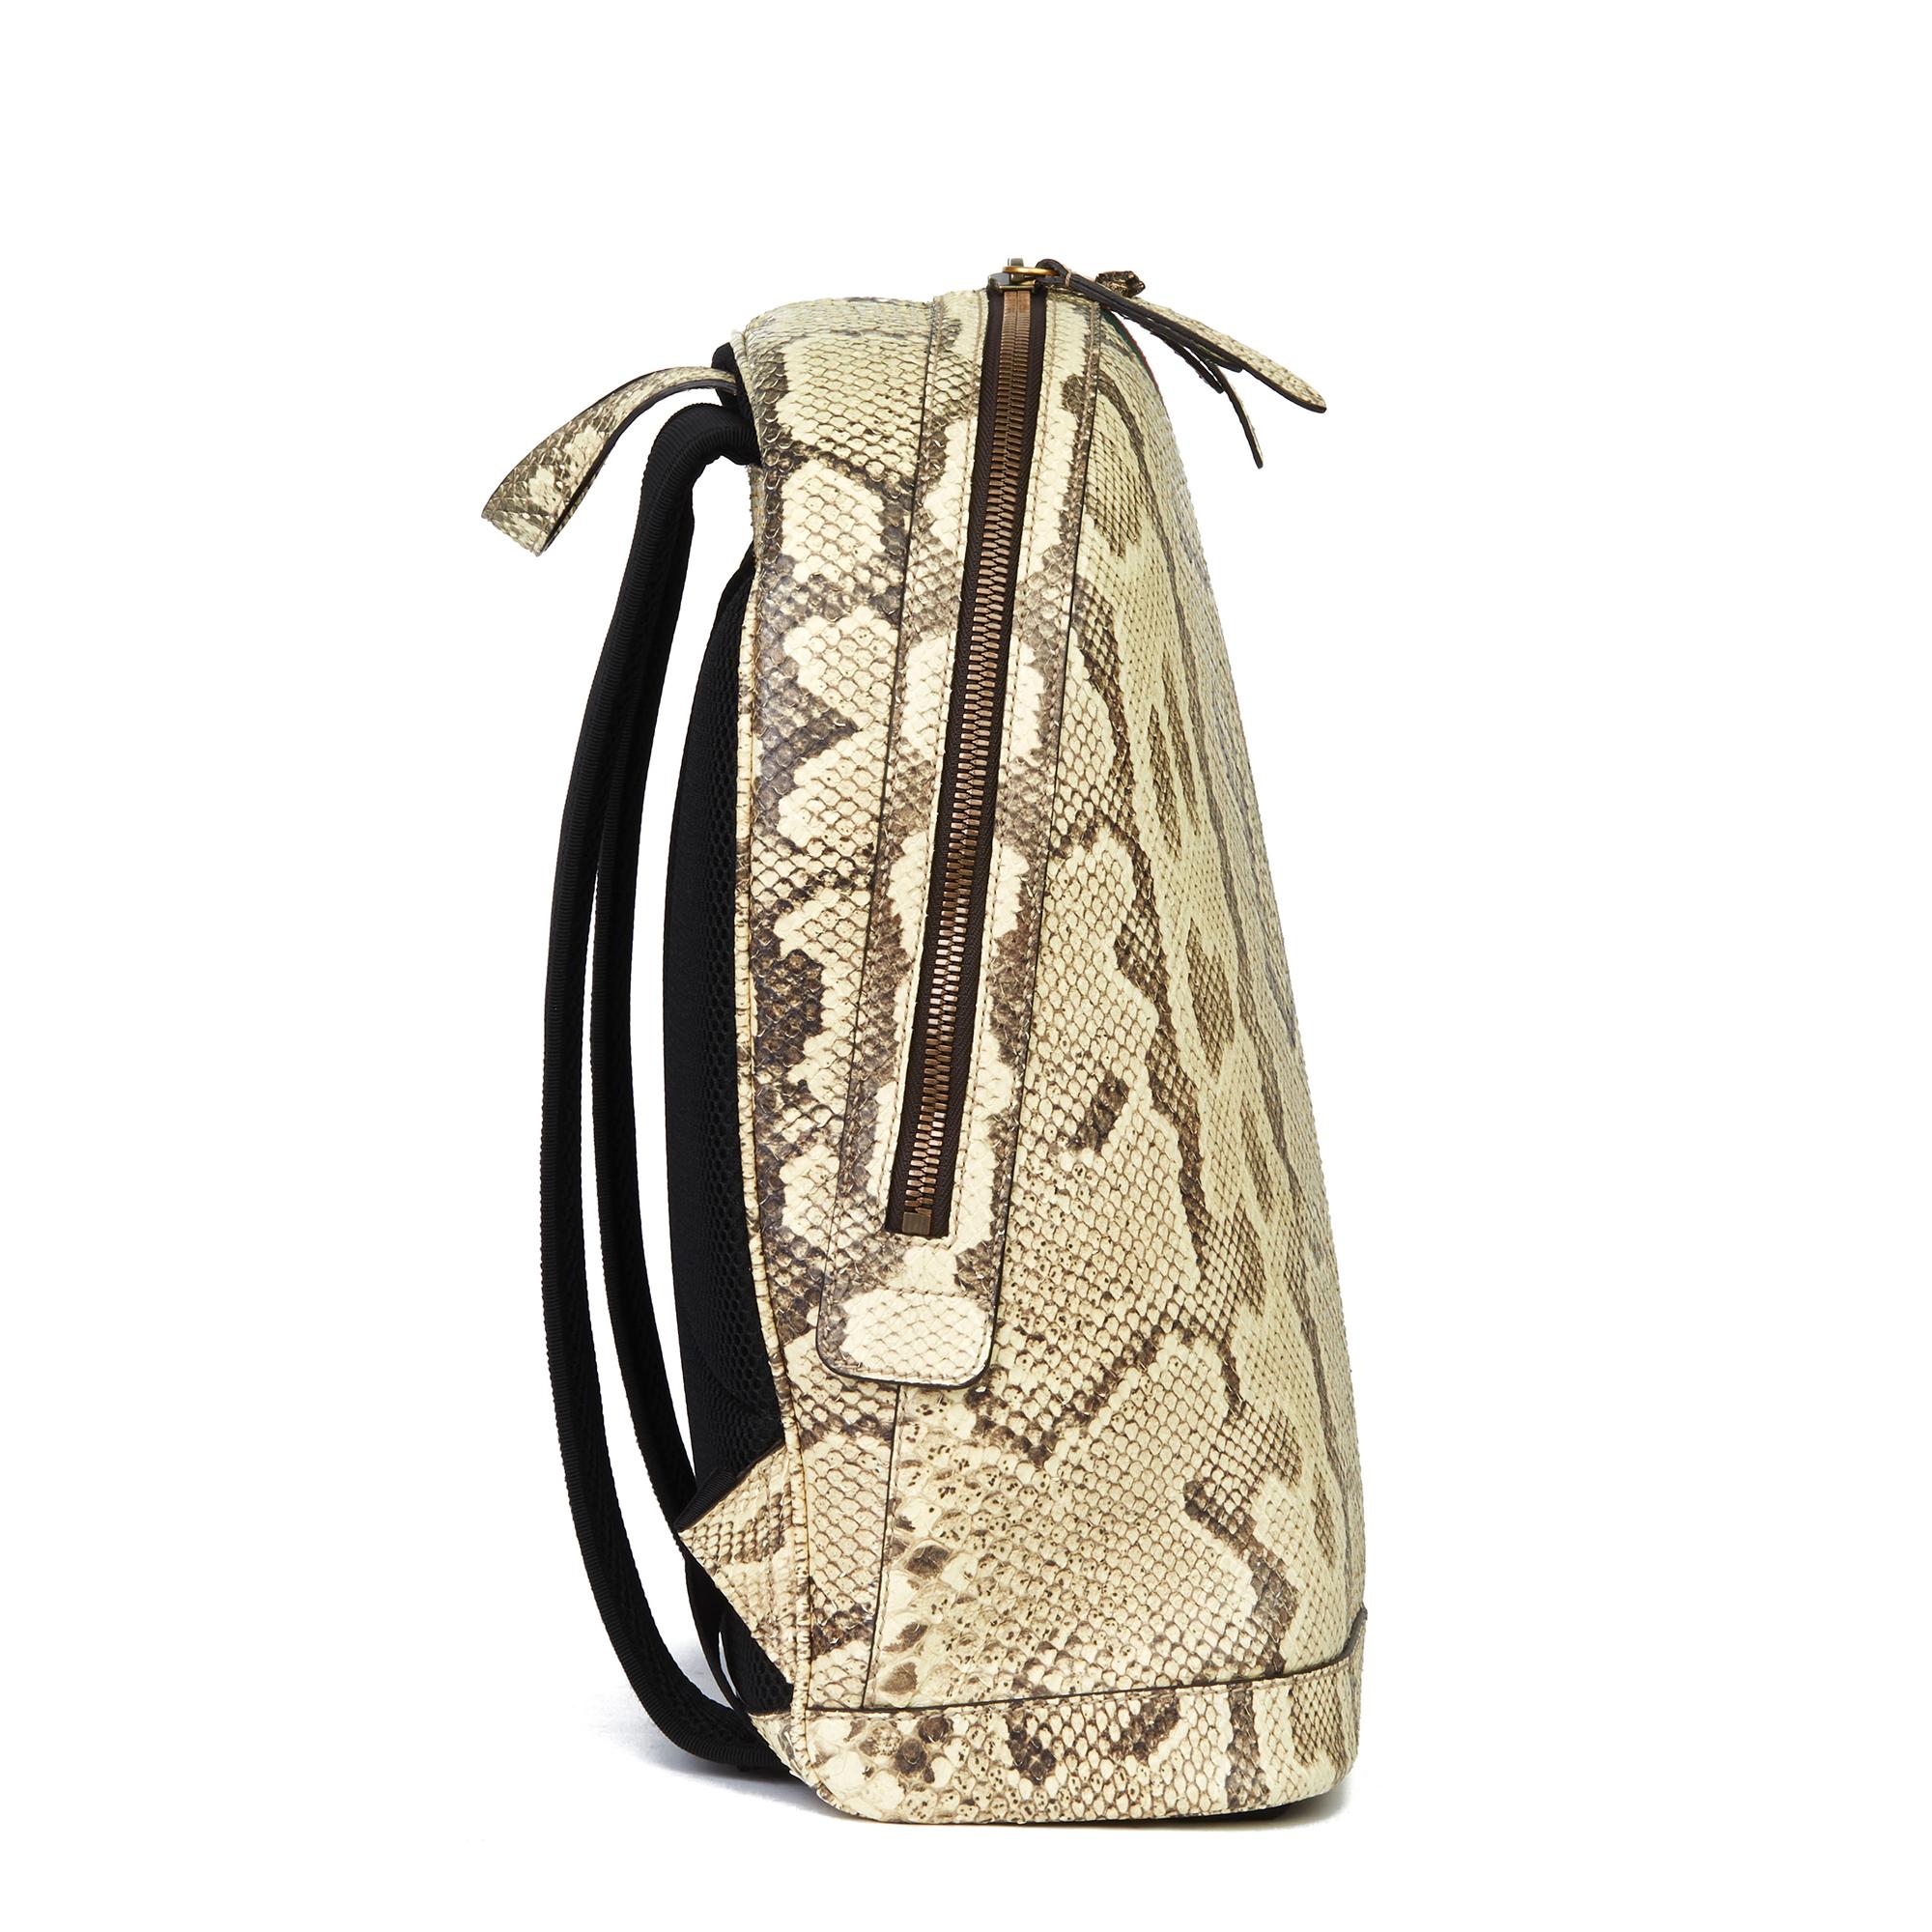 GUCCI
Natural Animalier Python Leather & Web Backpack

Xupes Reference: HB3086
Serial Number: 442892 213317
Age (Circa): 2019
Accompanied By: Gucci Dust Bag, CITIES
Authenticity Details: Serial Stamp (Made in Italy)
Gender: Unisex
Type: